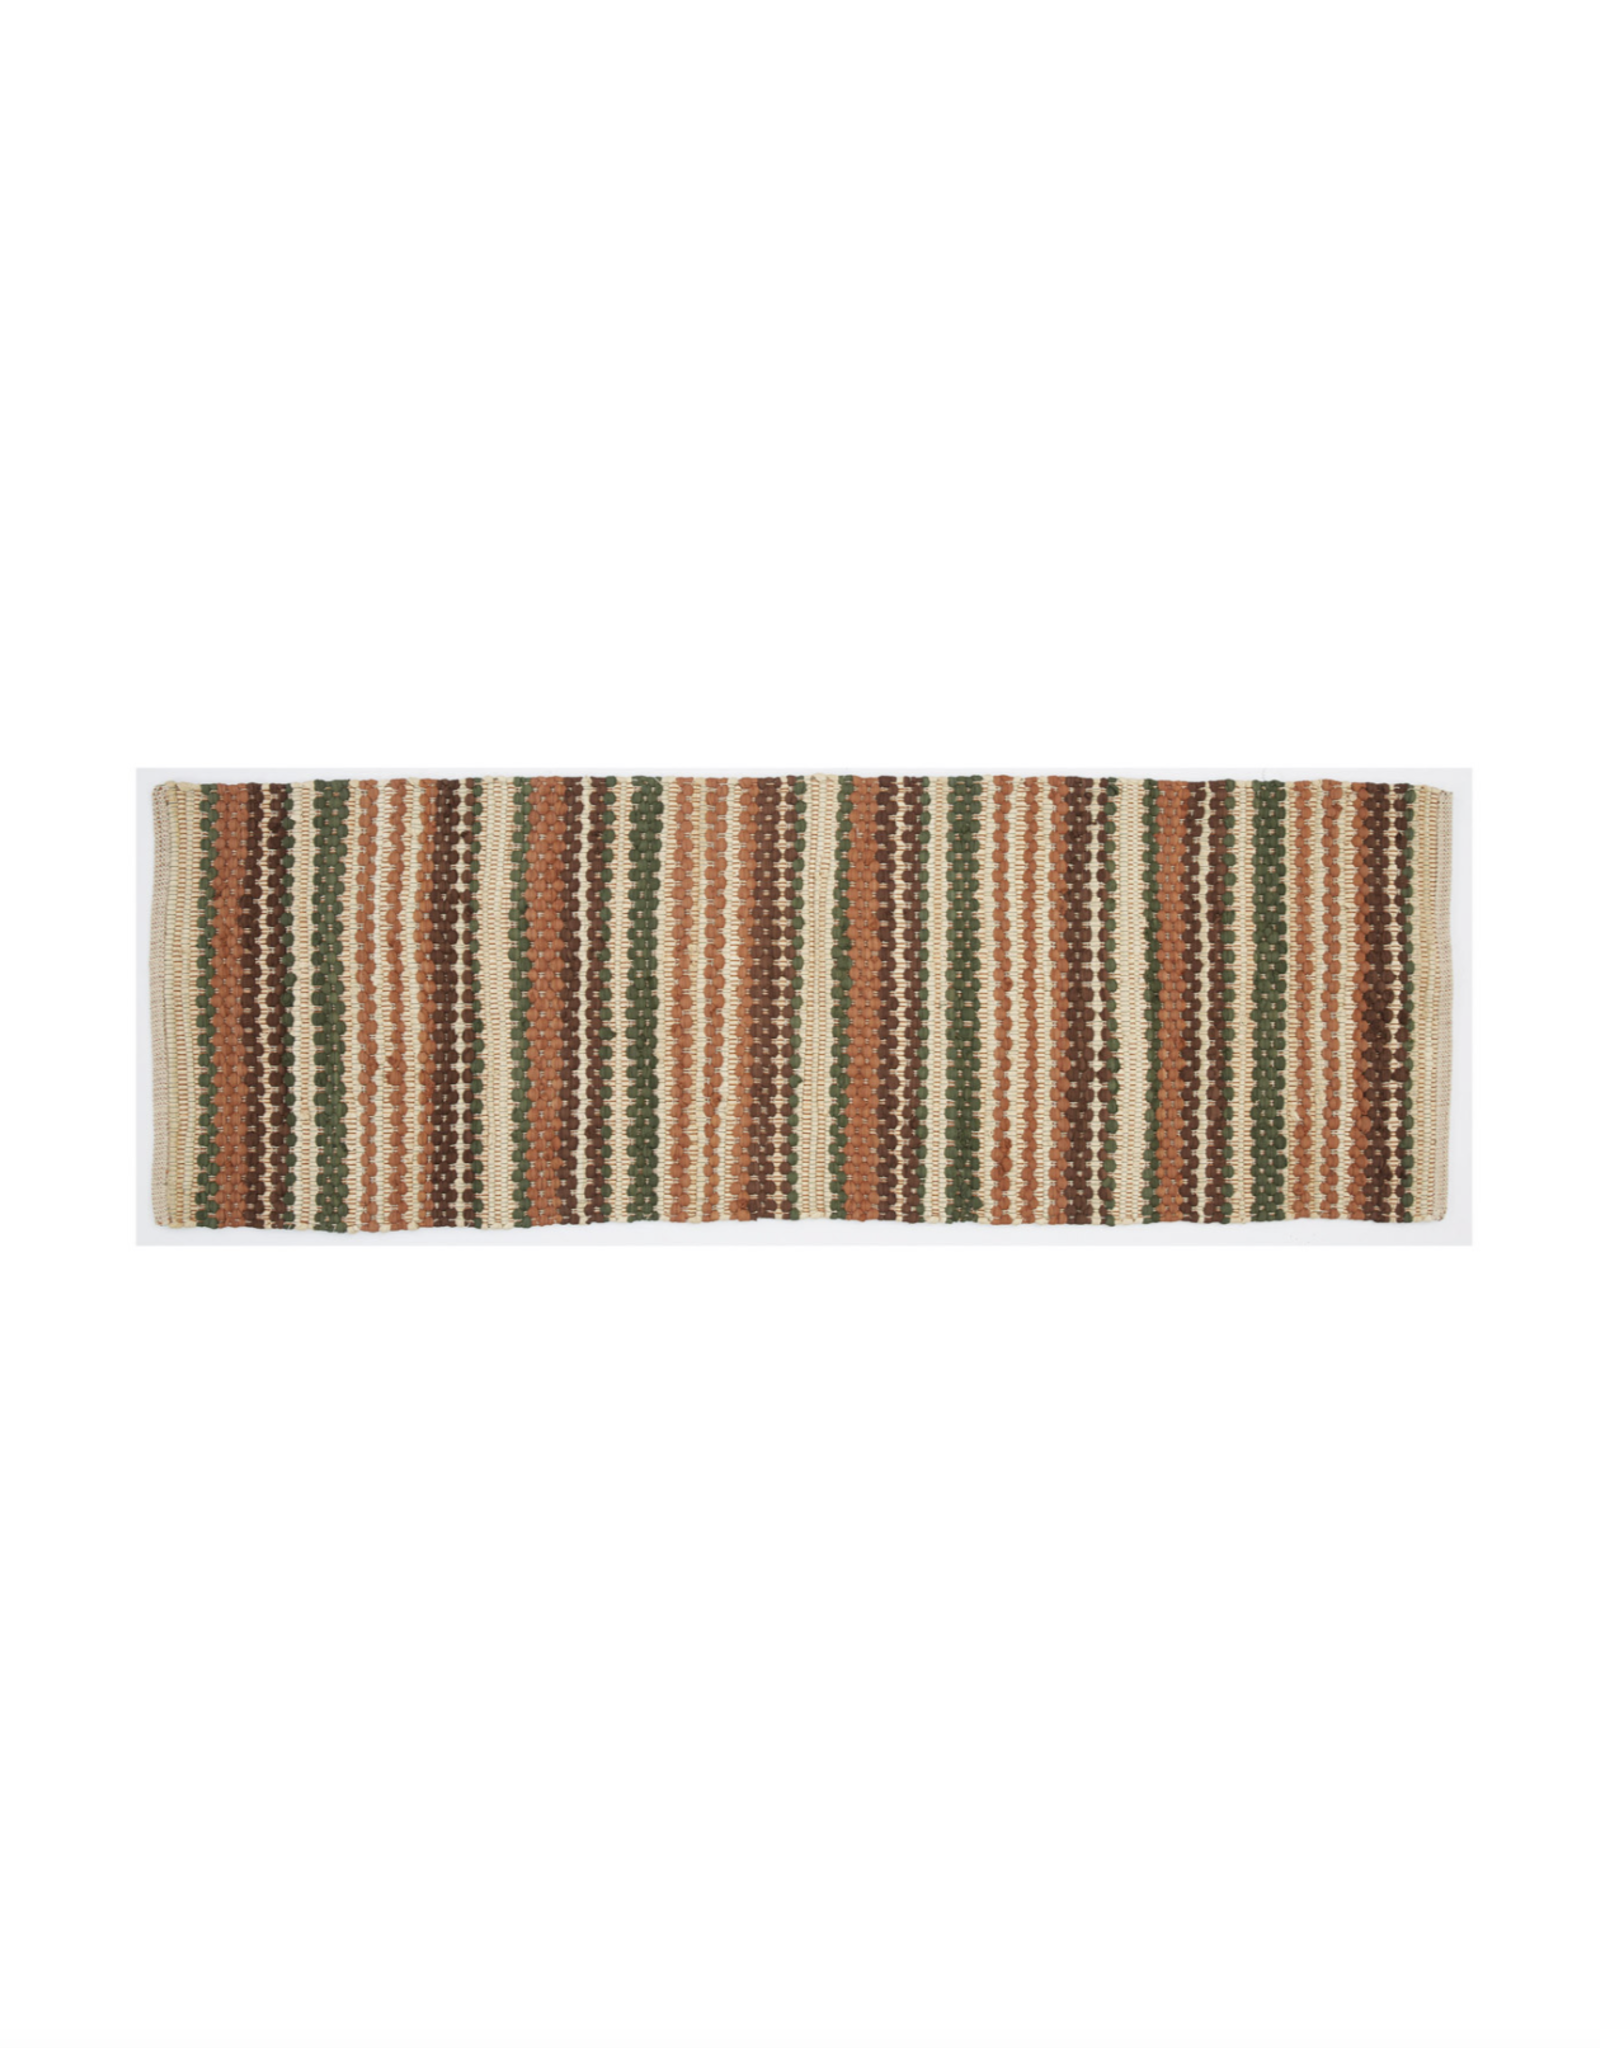 Park Designs 2' x 6' Woven Rug - Woodbourne